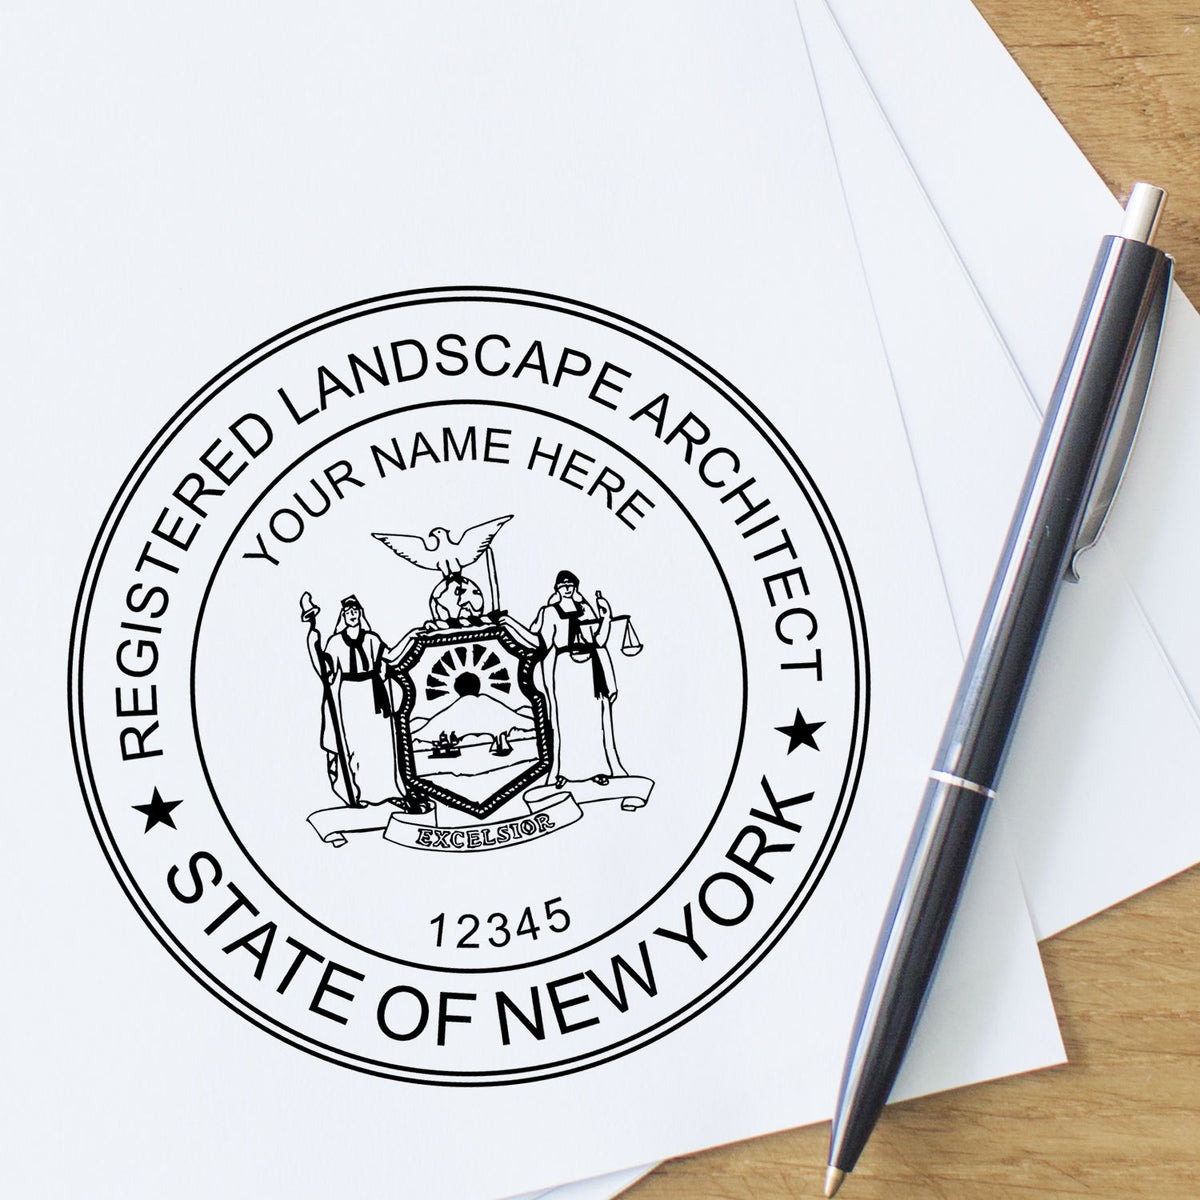 A photograph of the Self-Inking New York Landscape Architect Stamp stamp impression reveals a vivid, professional image of the on paper.